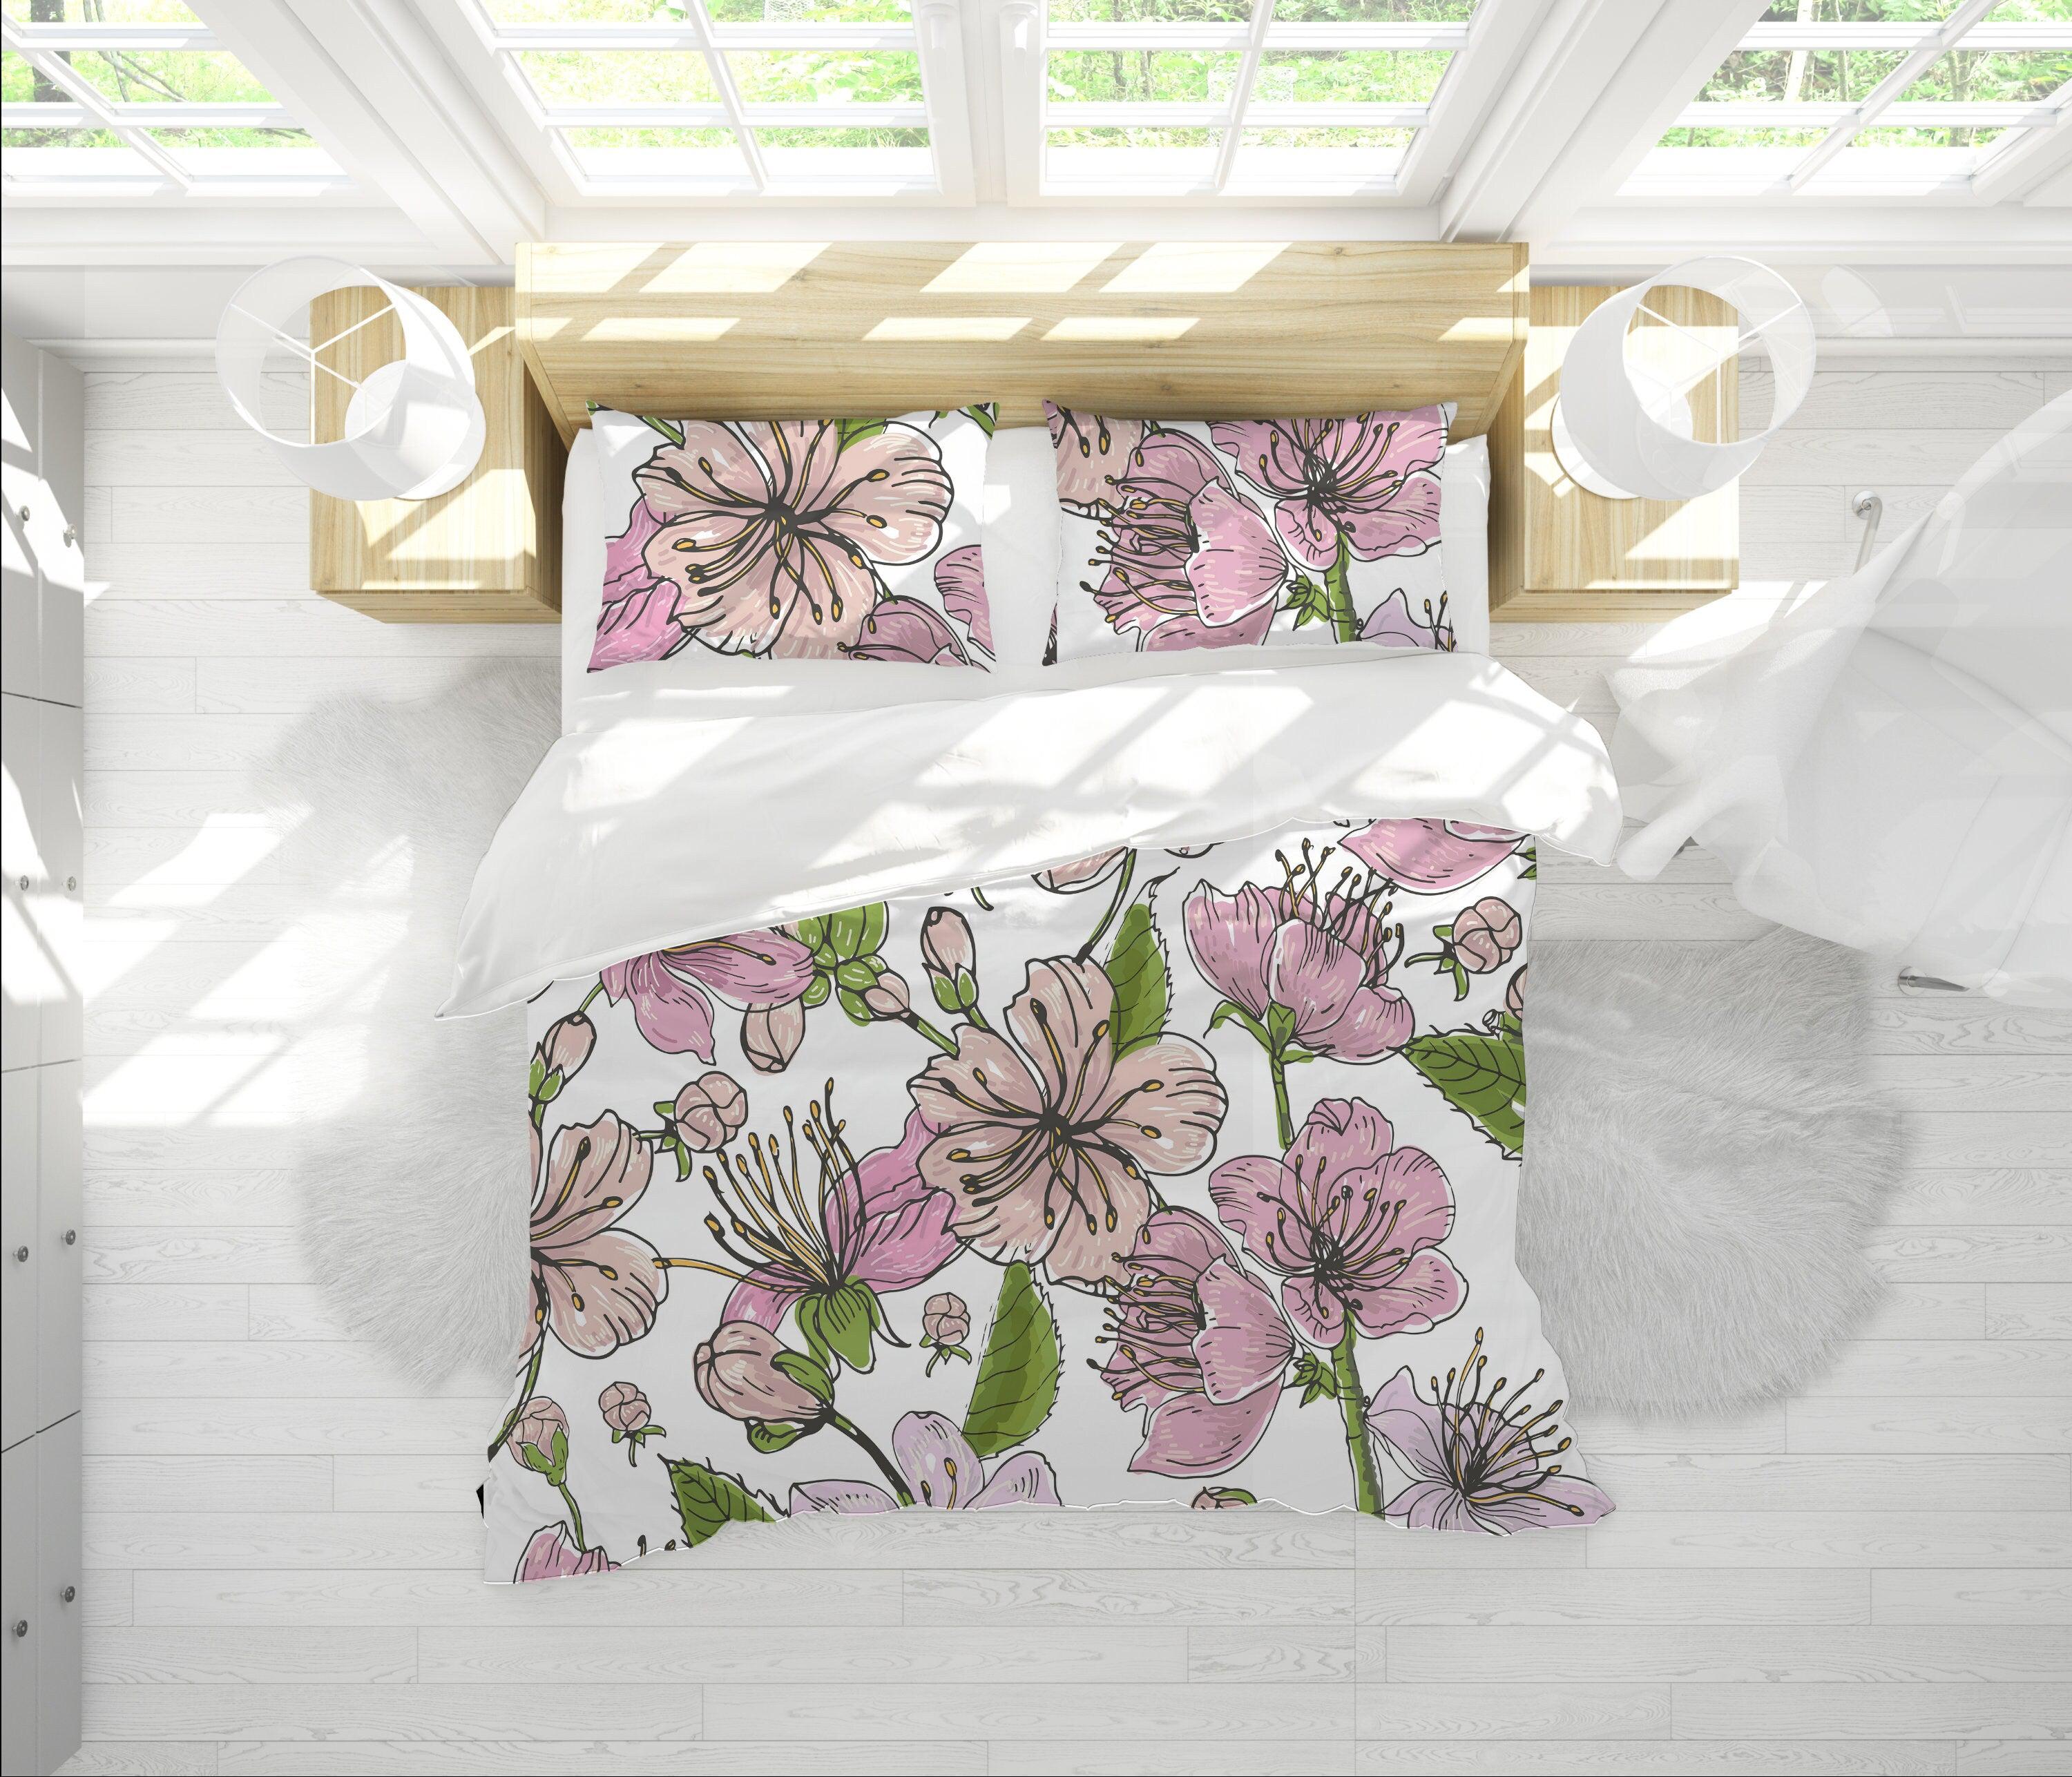 daintyduvet Cherry Blossoms White Duvet Cover Set | Floral Bedding Set with Pillow Cover Case